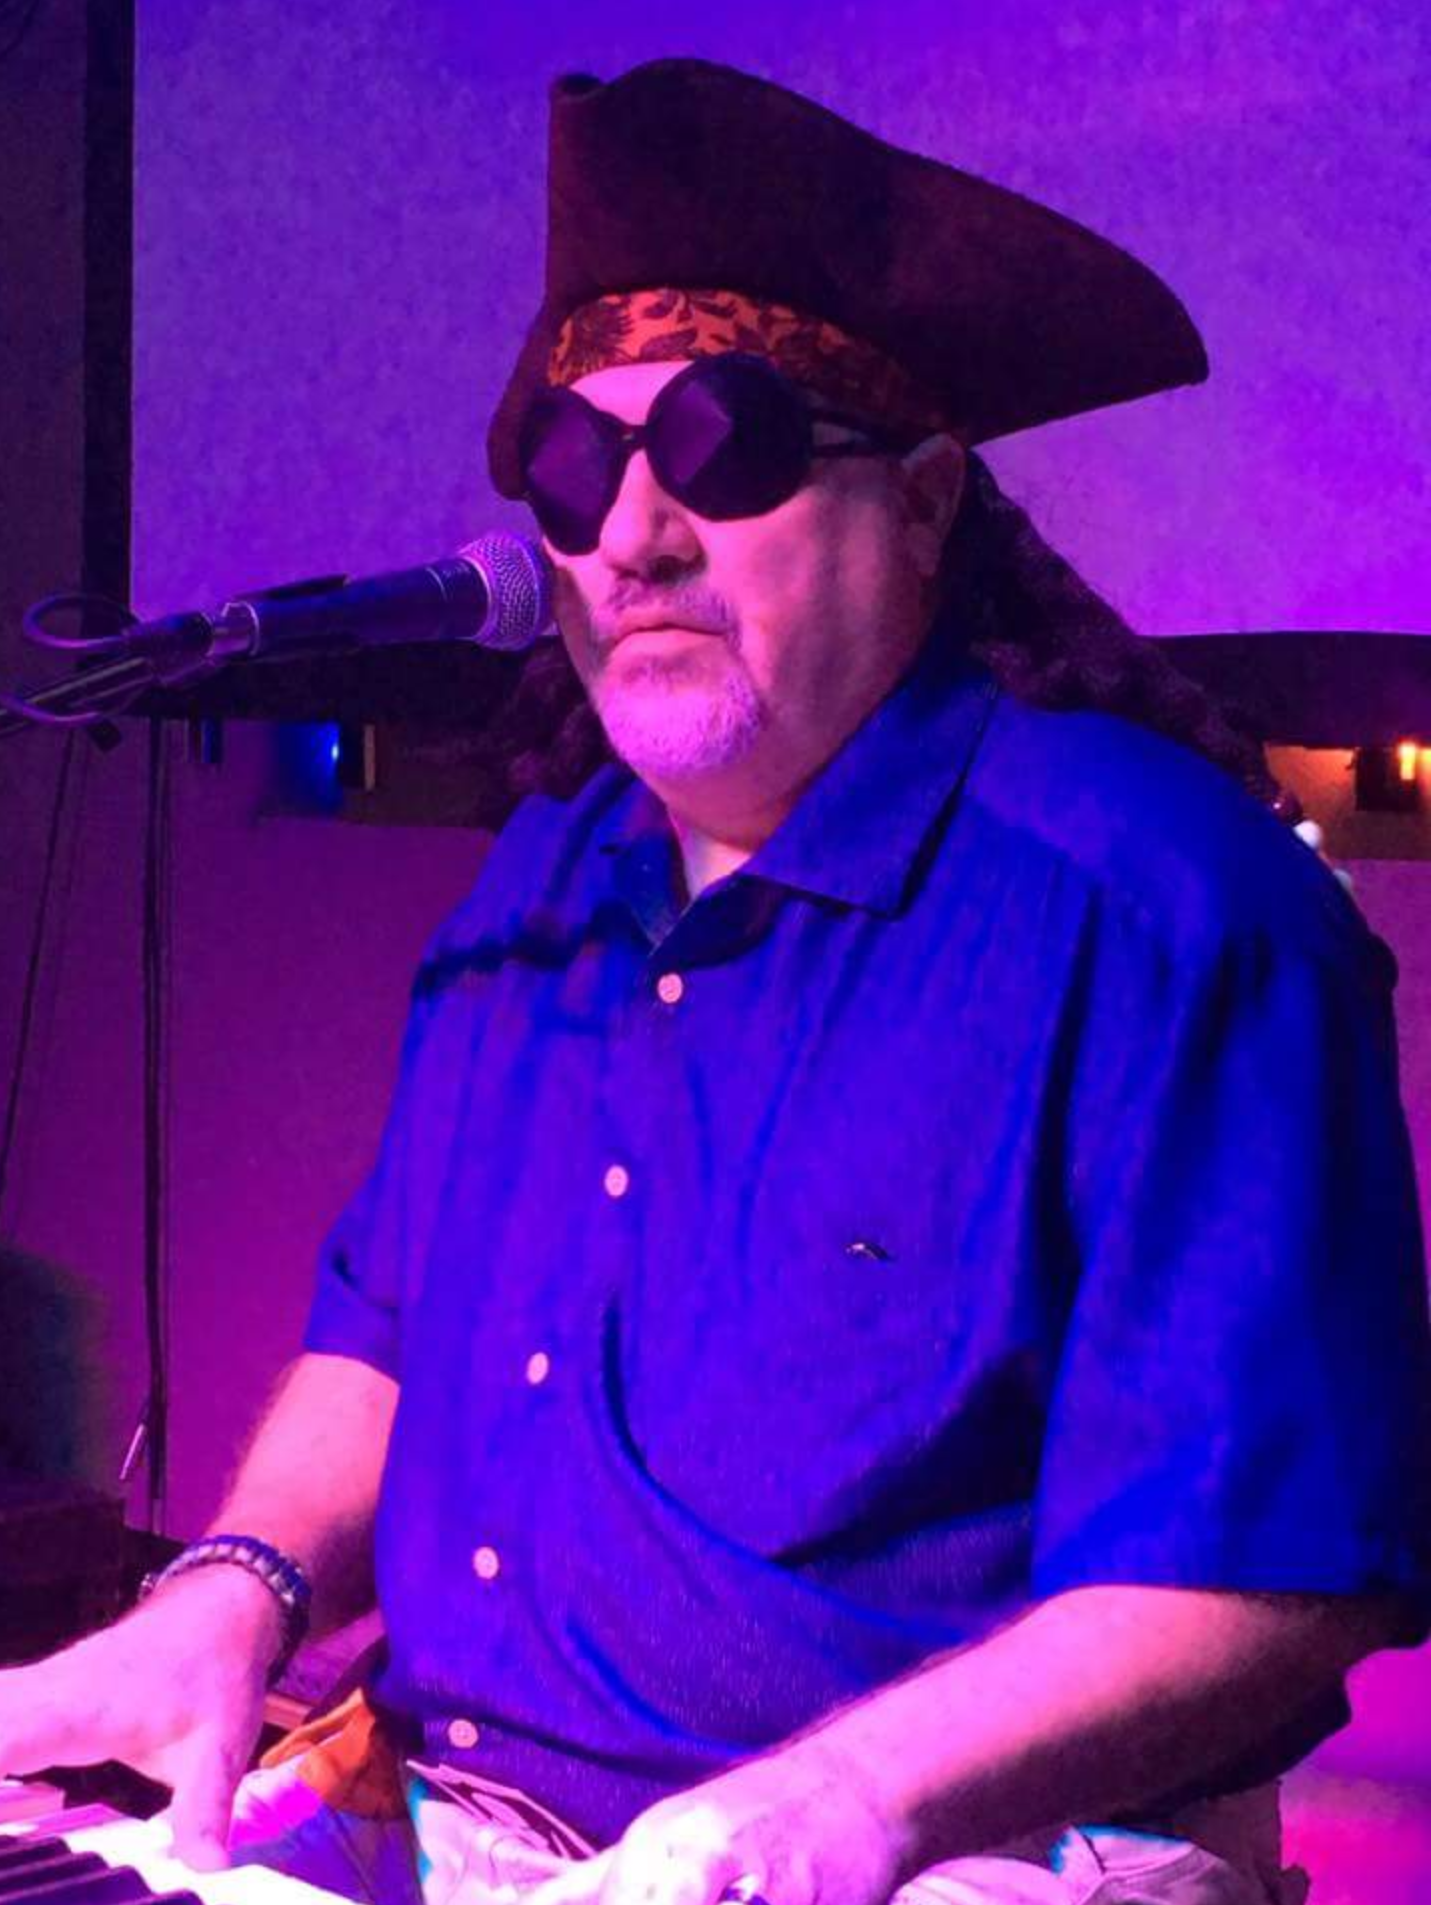 My Dad who is blind dressed as a pirate for Halloween.